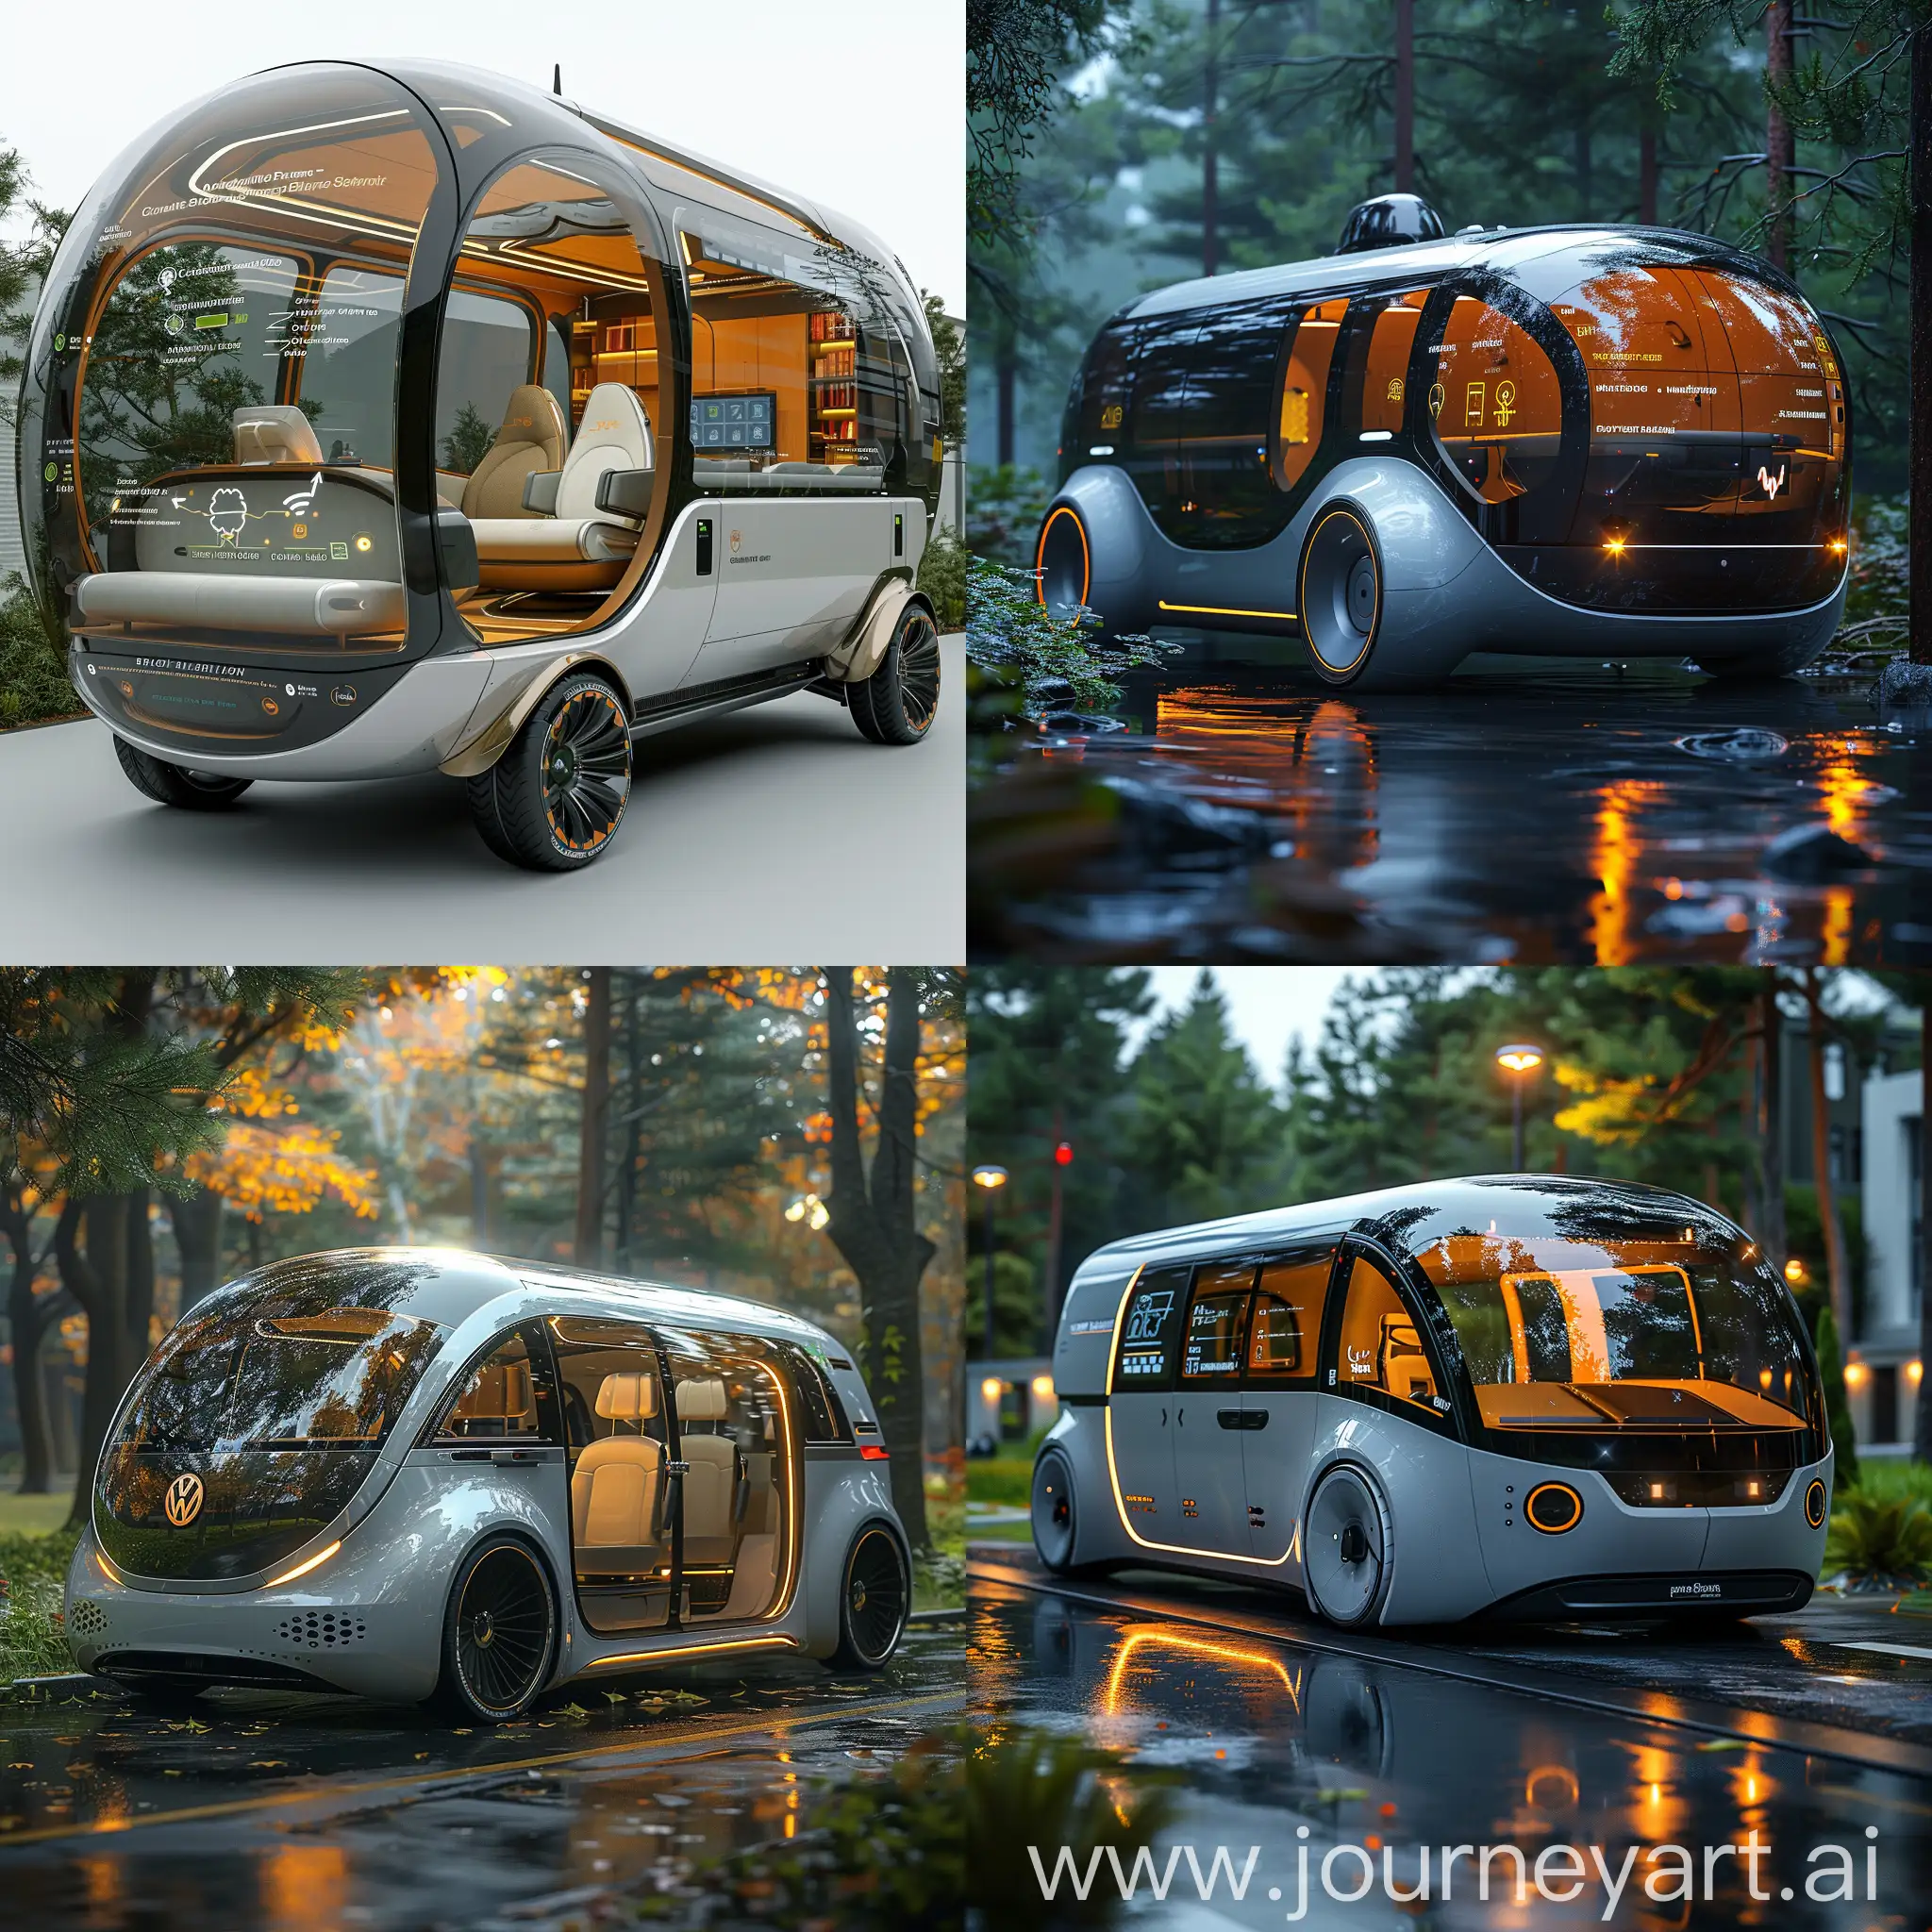 Futuristic microbus, Autonomous Driving, Augmented Reality Windshield, Biometric Identification, Holographic Display, Health Monitoring System, Smart Climate Control, Voice Command System, Augmented Reality Side Windows, Adaptive Suspension System, Wireless Charging Stations, Electric Powertrain, Solar Panels, Regenerative Braking, Recycled Materials, Low-Rolling Resistance Tires, Energy-Efficient LED Lighting, Air Purification System, Aerodynamic Design, Green Roof, Biodegradable Interiors, Reinforced Frame, Advanced Airbags System, Crash Sensor Technology, Multi-point Seatbelts, Side Impact Protection, Anti-rollover Technology, Tempered Safety Glass, Emergency Exit Systems, Shock-Absorbing Bumpers, Emergency Communication System, octane render --stylize 1000